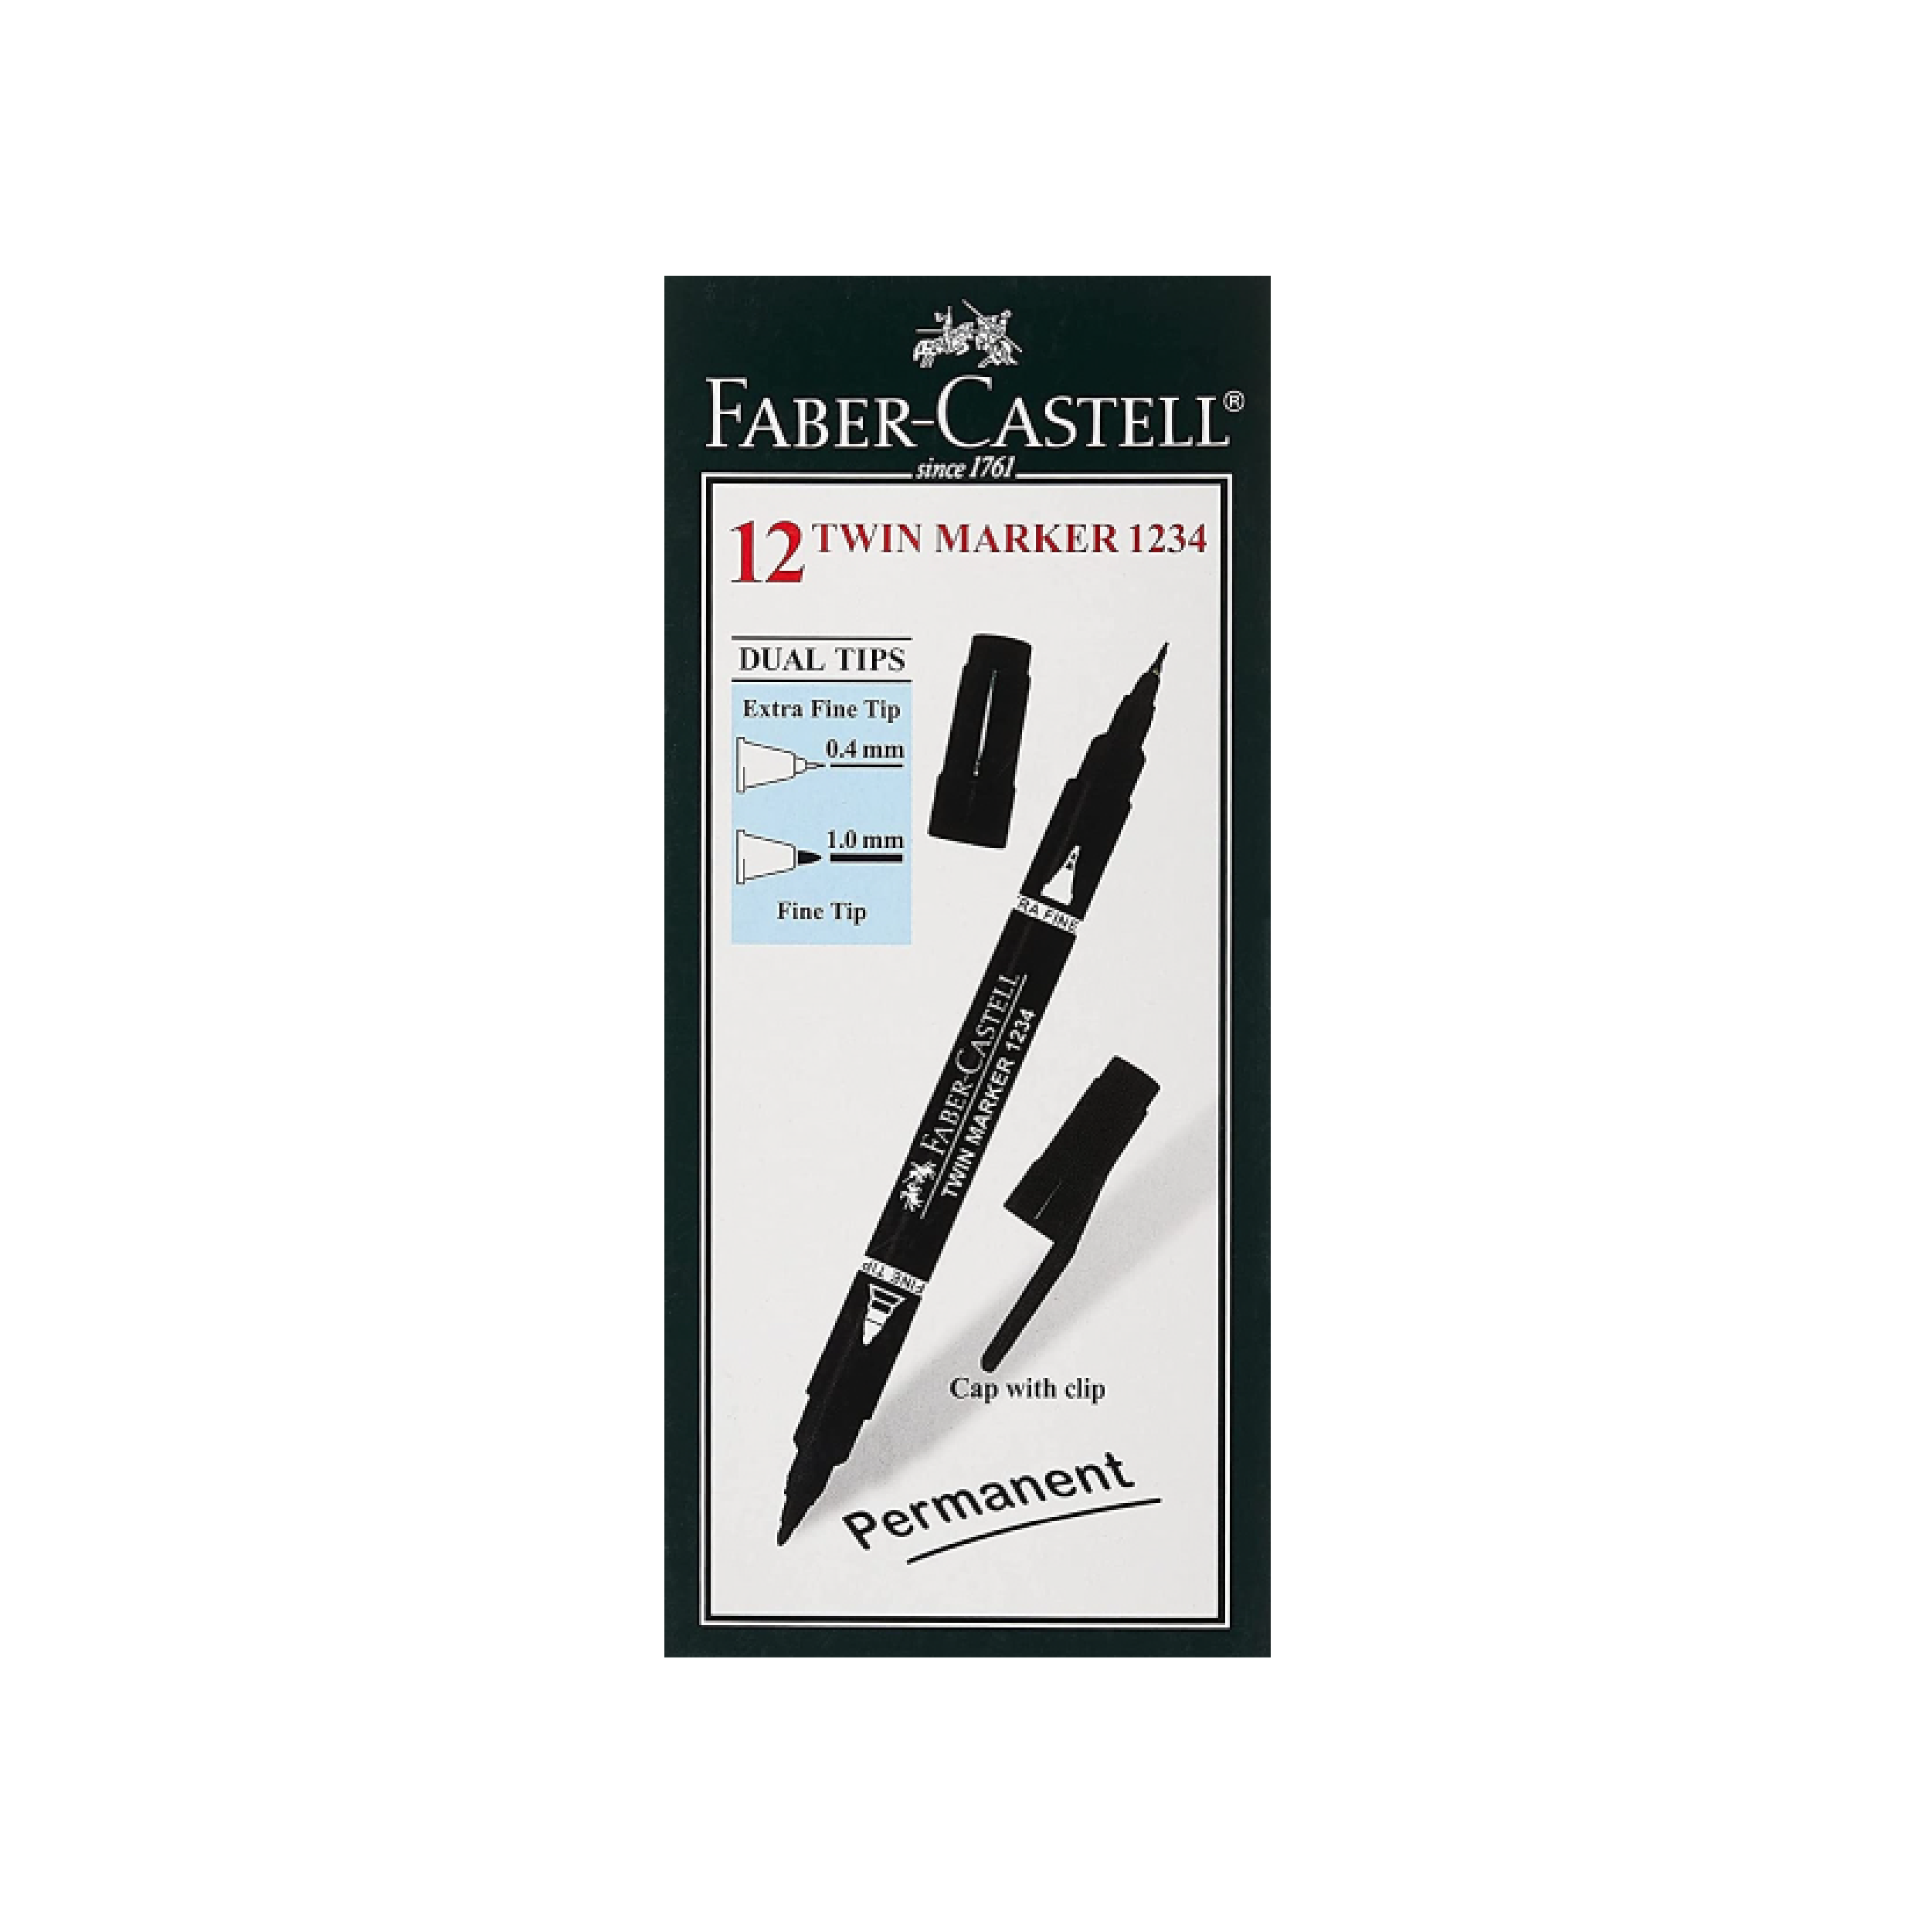 Faber Castell Permanent Twin Marker, Twin Tip, Black (1234)